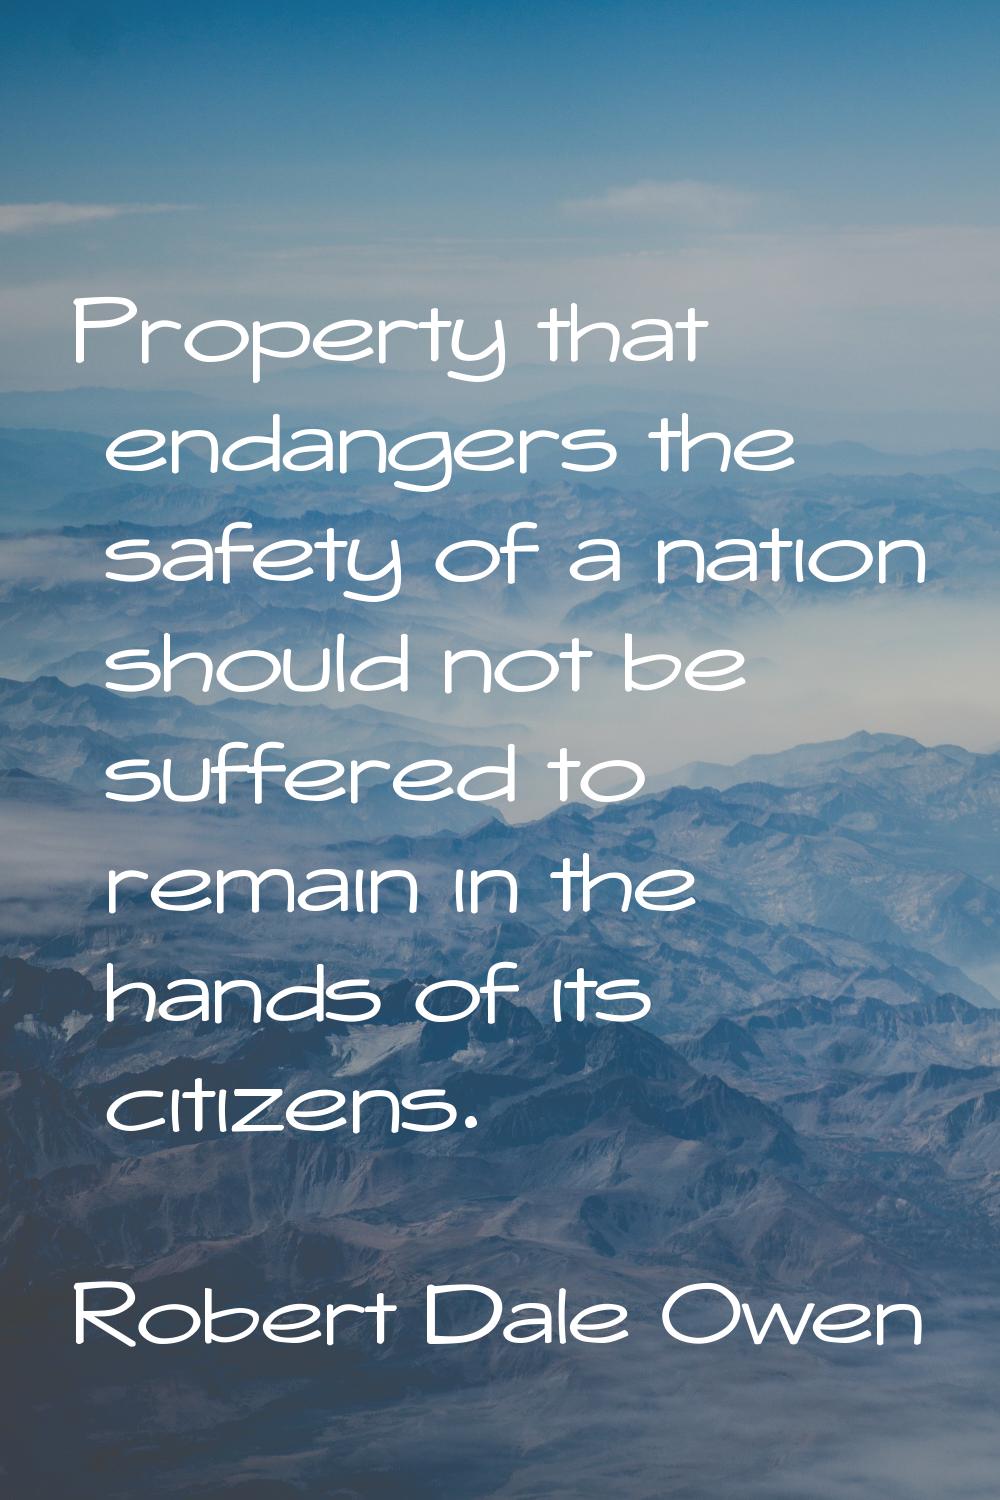 Property that endangers the safety of a nation should not be suffered to remain in the hands of its